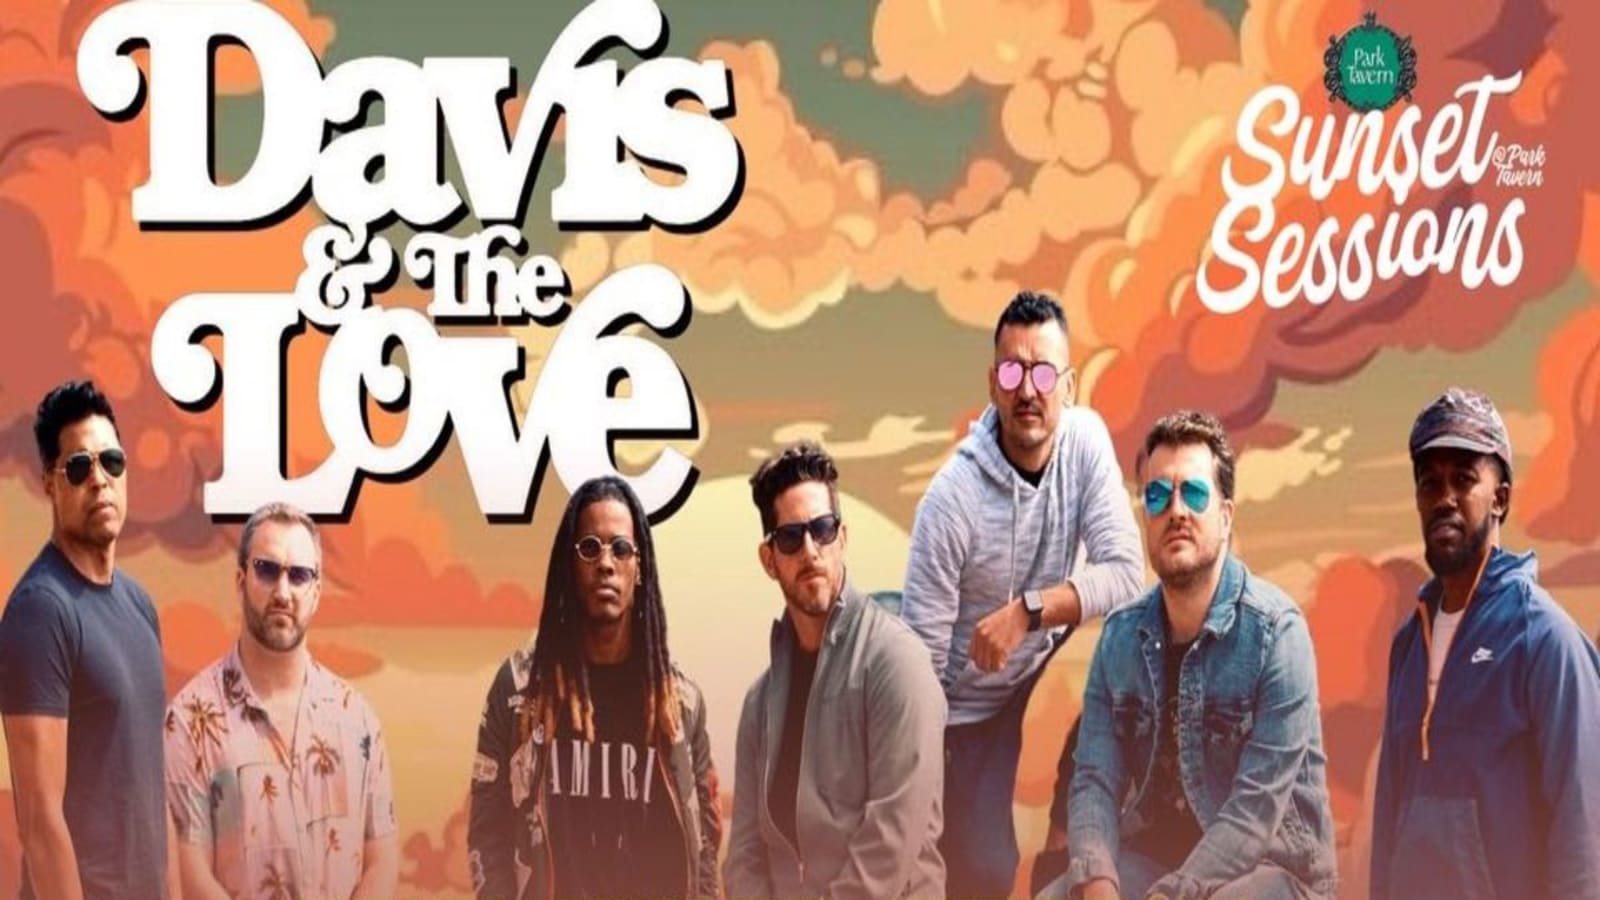 Sunset Sessions with Davis & The Love